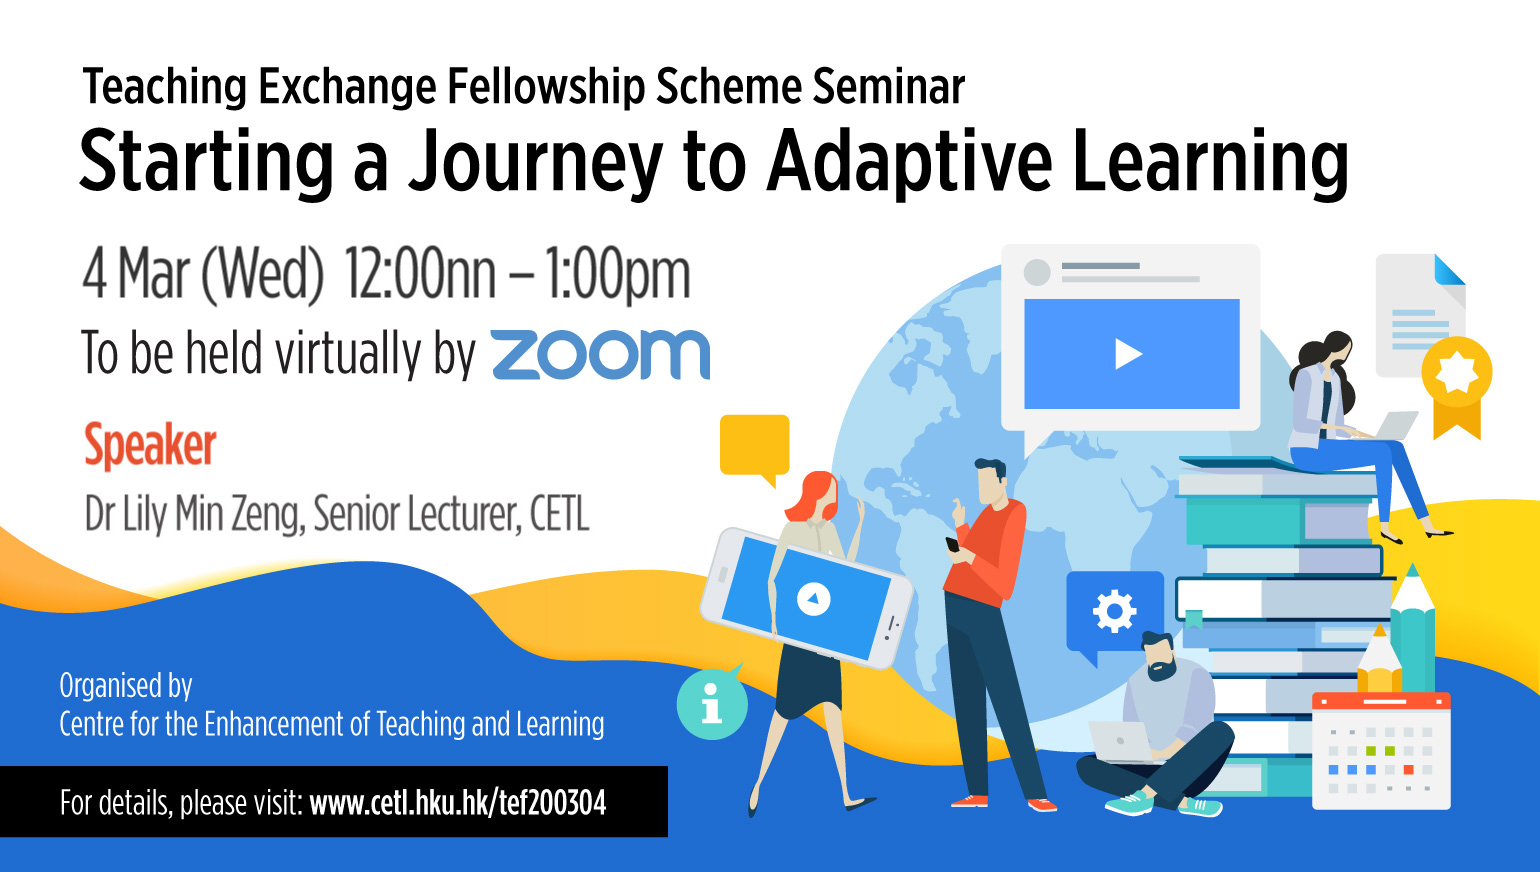 Starting a journey to adaptive learning